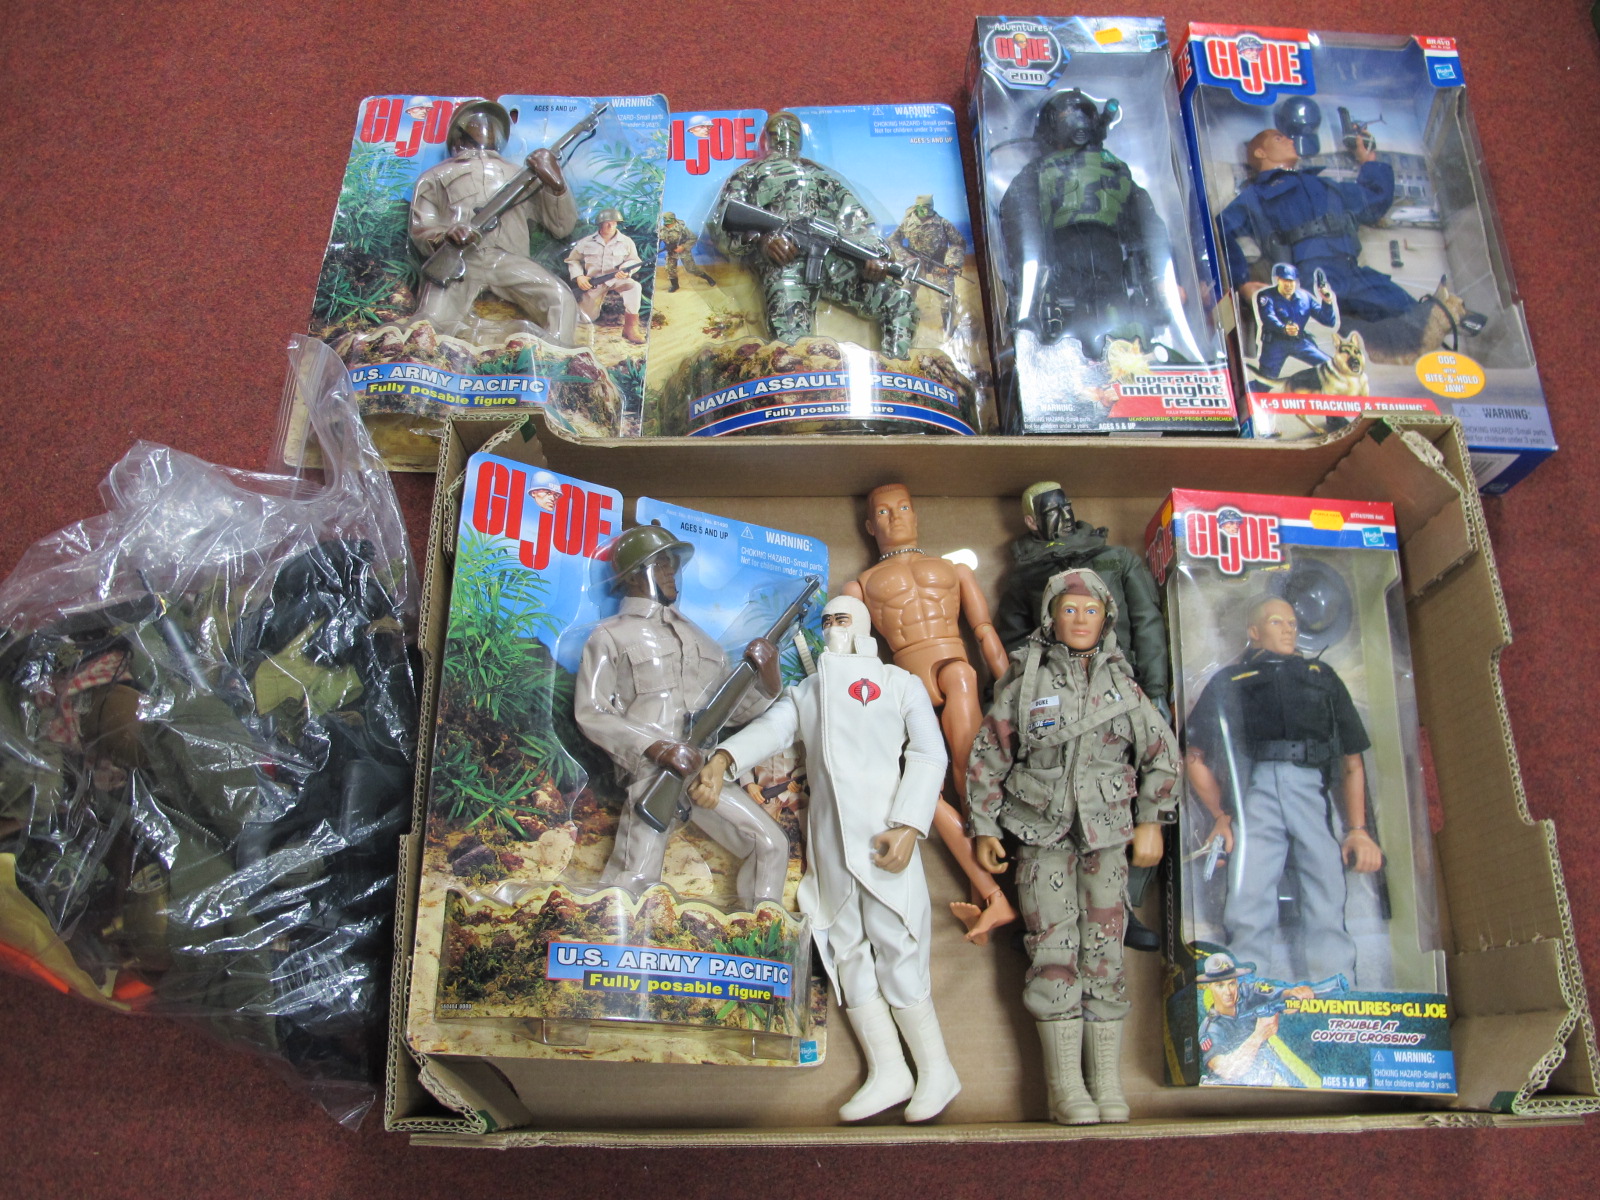 G.I Joe, boxed Bravo Action Figures, U.S Army Pacific, plus loose examples, clothing, etc.